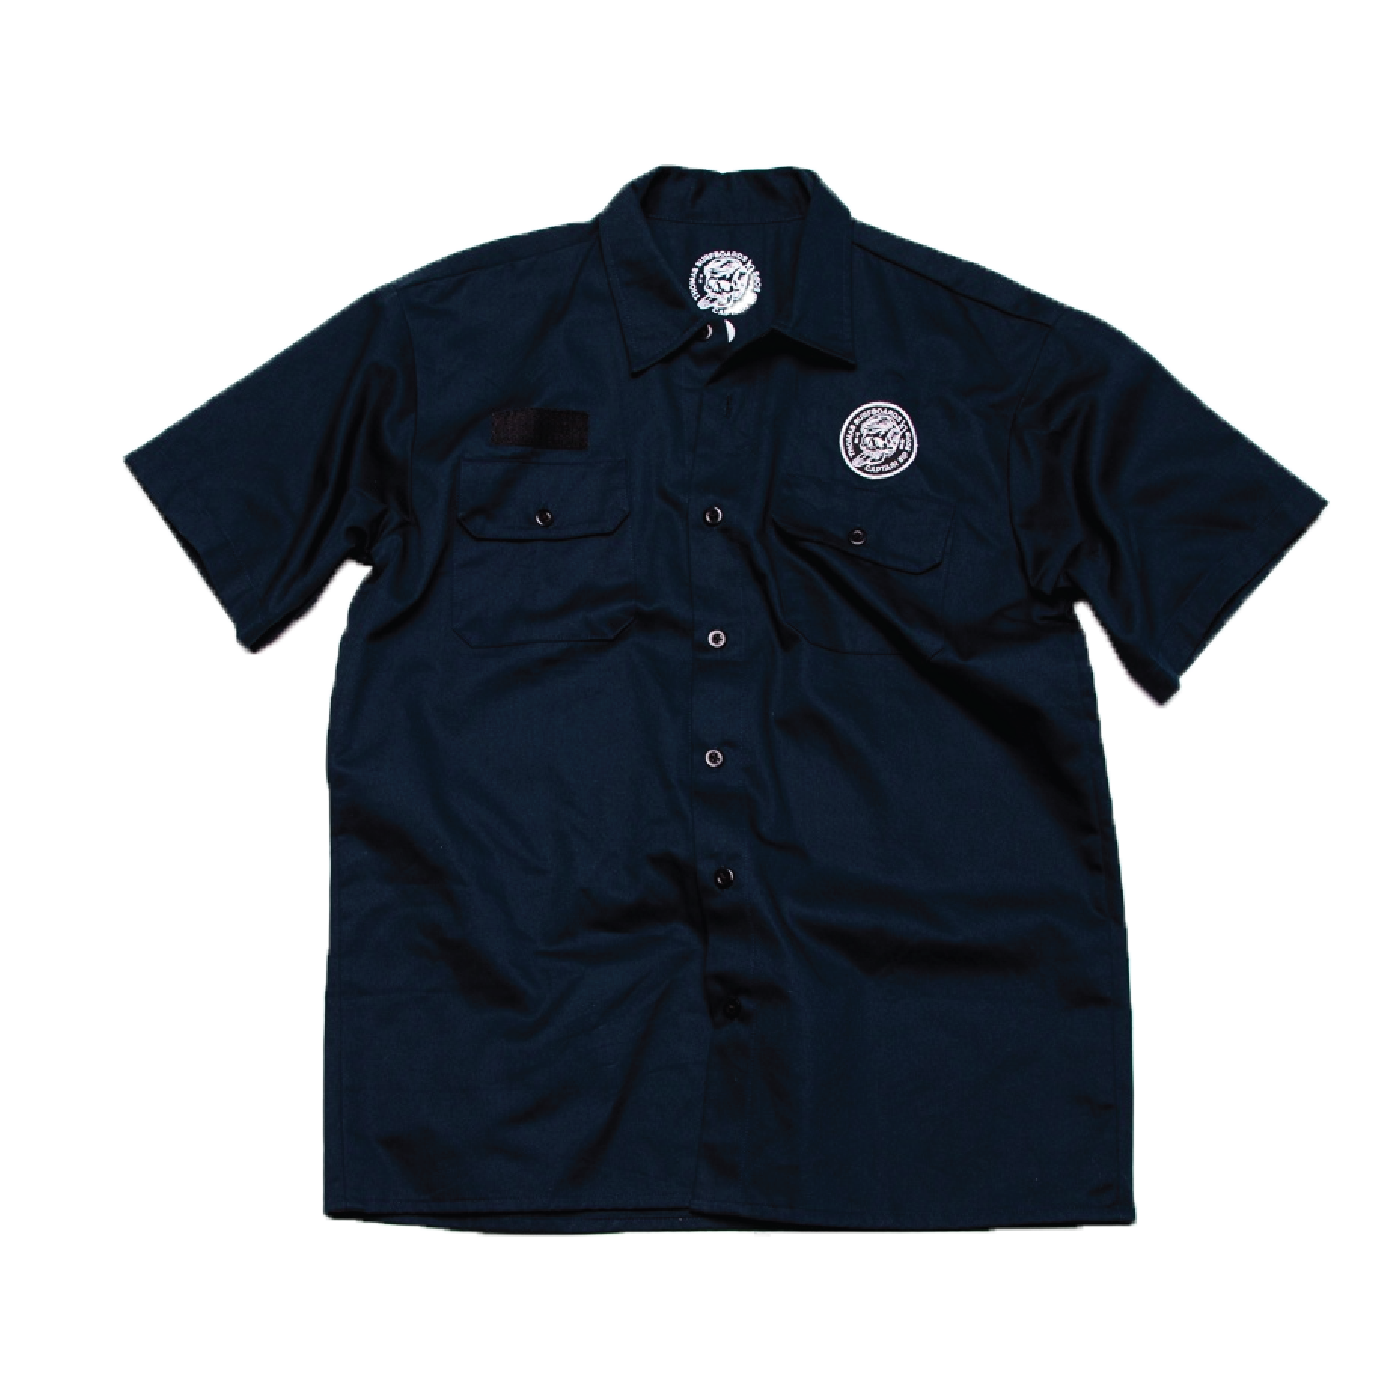 Thomas Surfboards & Captain Sip Sops Colab Stay Bold Work Shirt Navy